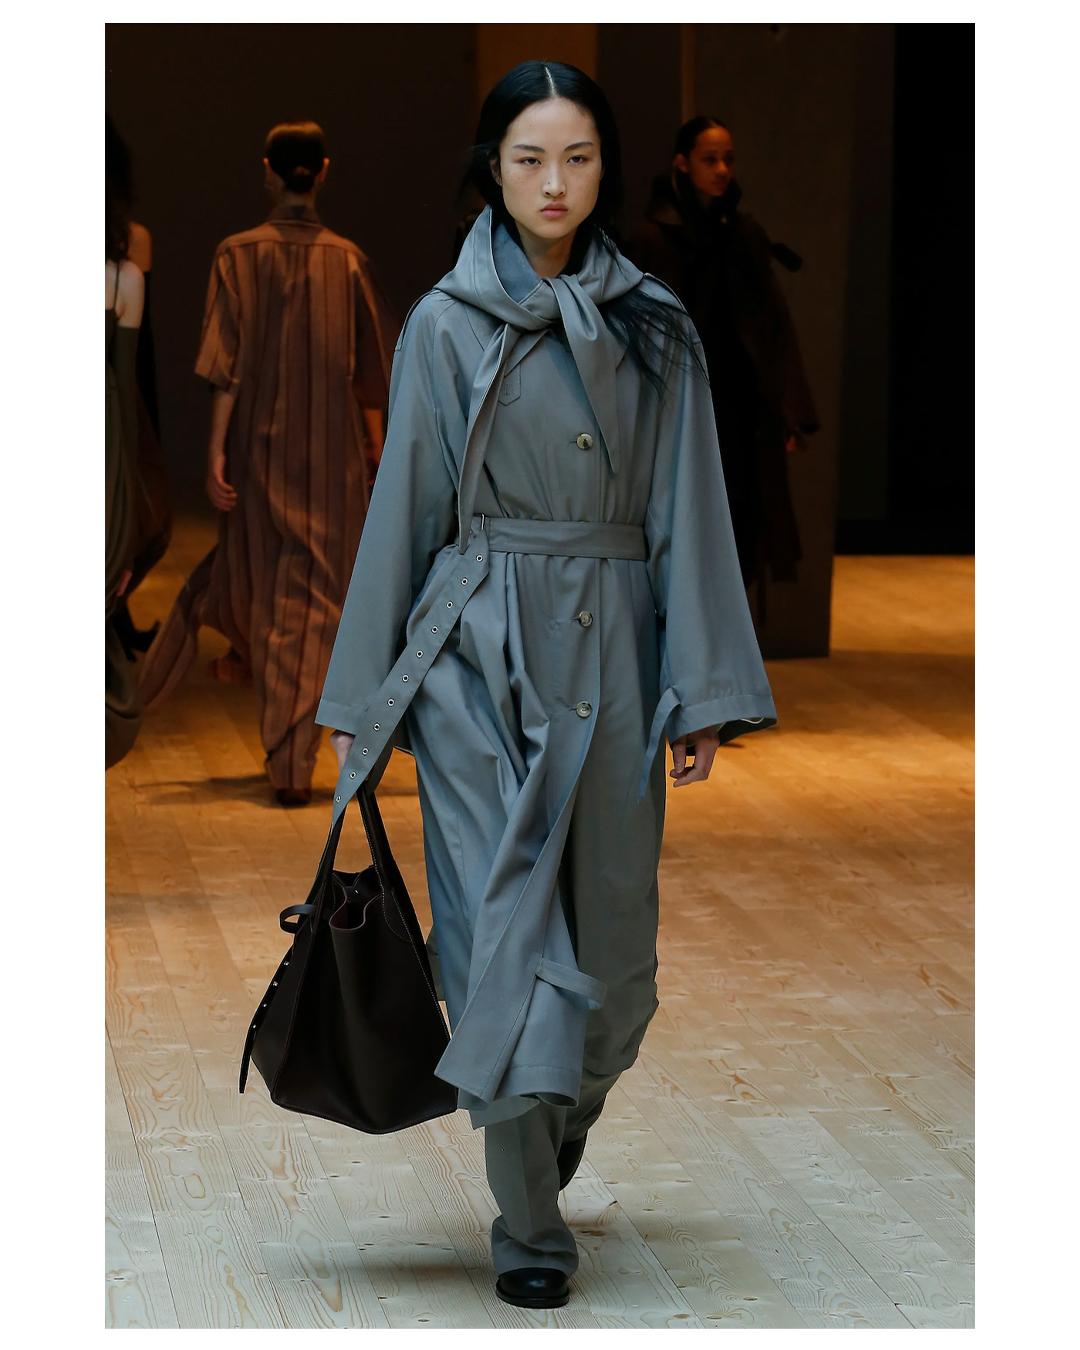 Celine Fall 2017 wool trench coat in grey
Ankle length - Please note our model is very tall - Please refer to the measurements below
Oversized fit
Detachable belt
Large oversized buttons
MADE IN FRANCE

Composition:
99% wool, 1% cashmere
Doublure -